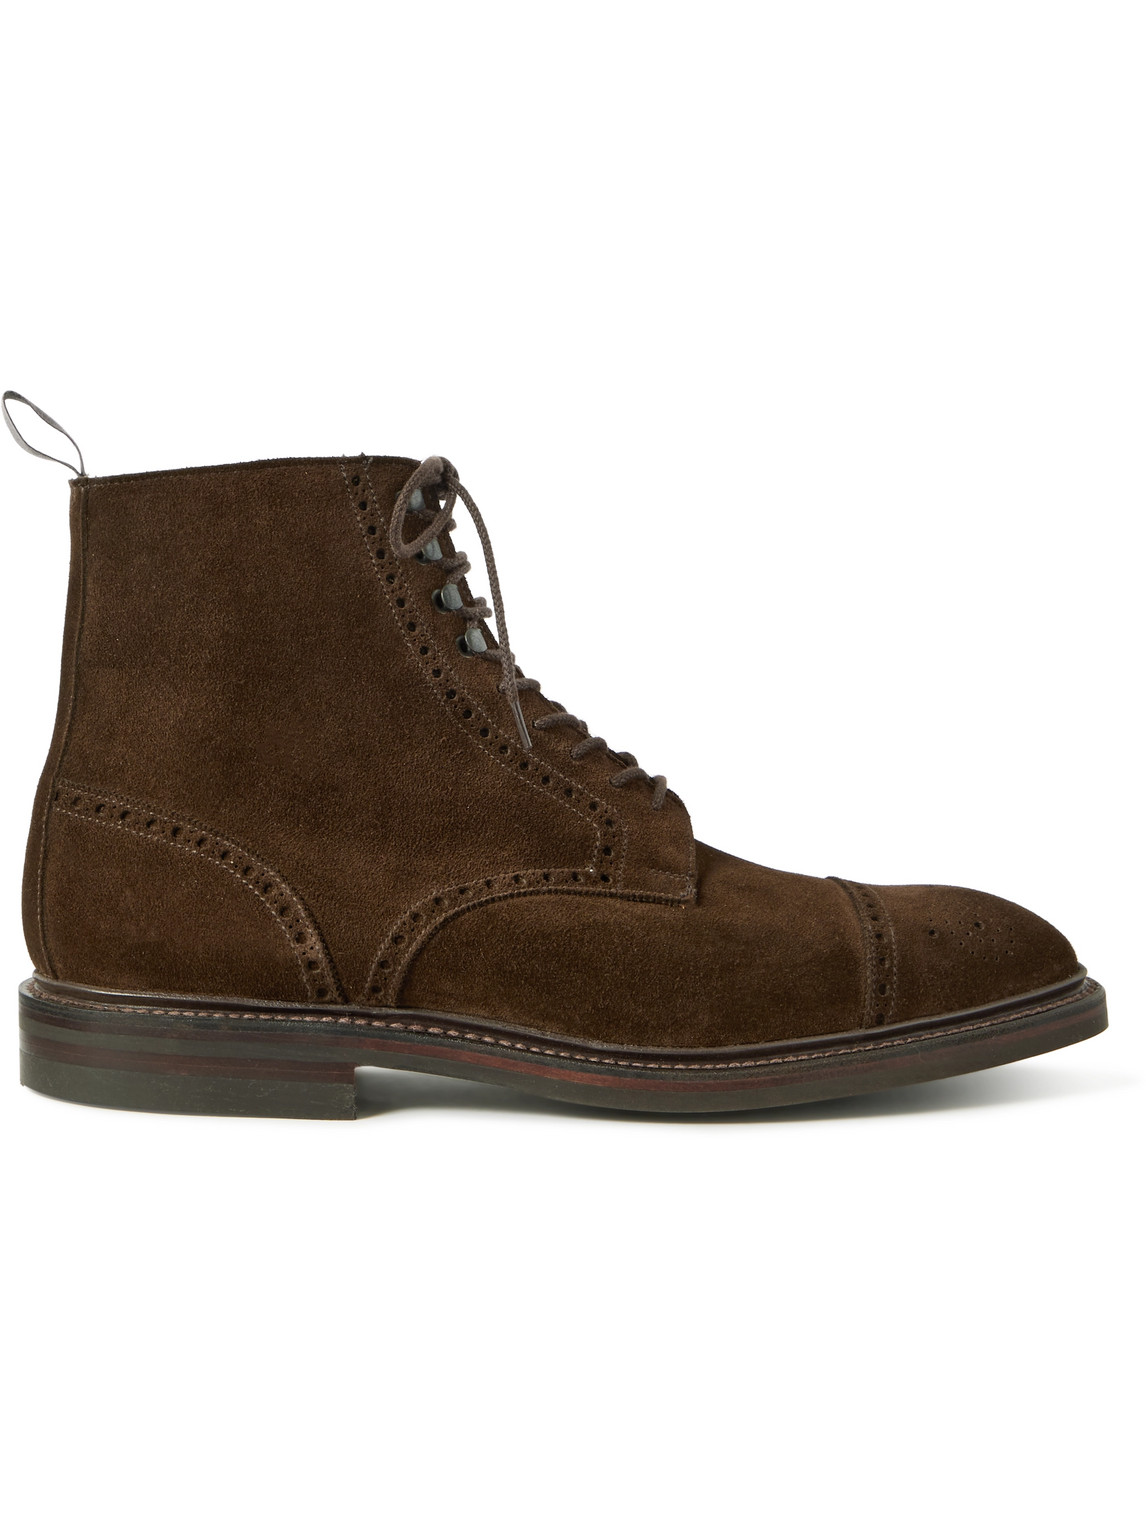 George Cleverley Toby Suede Brogue Boots In Brown